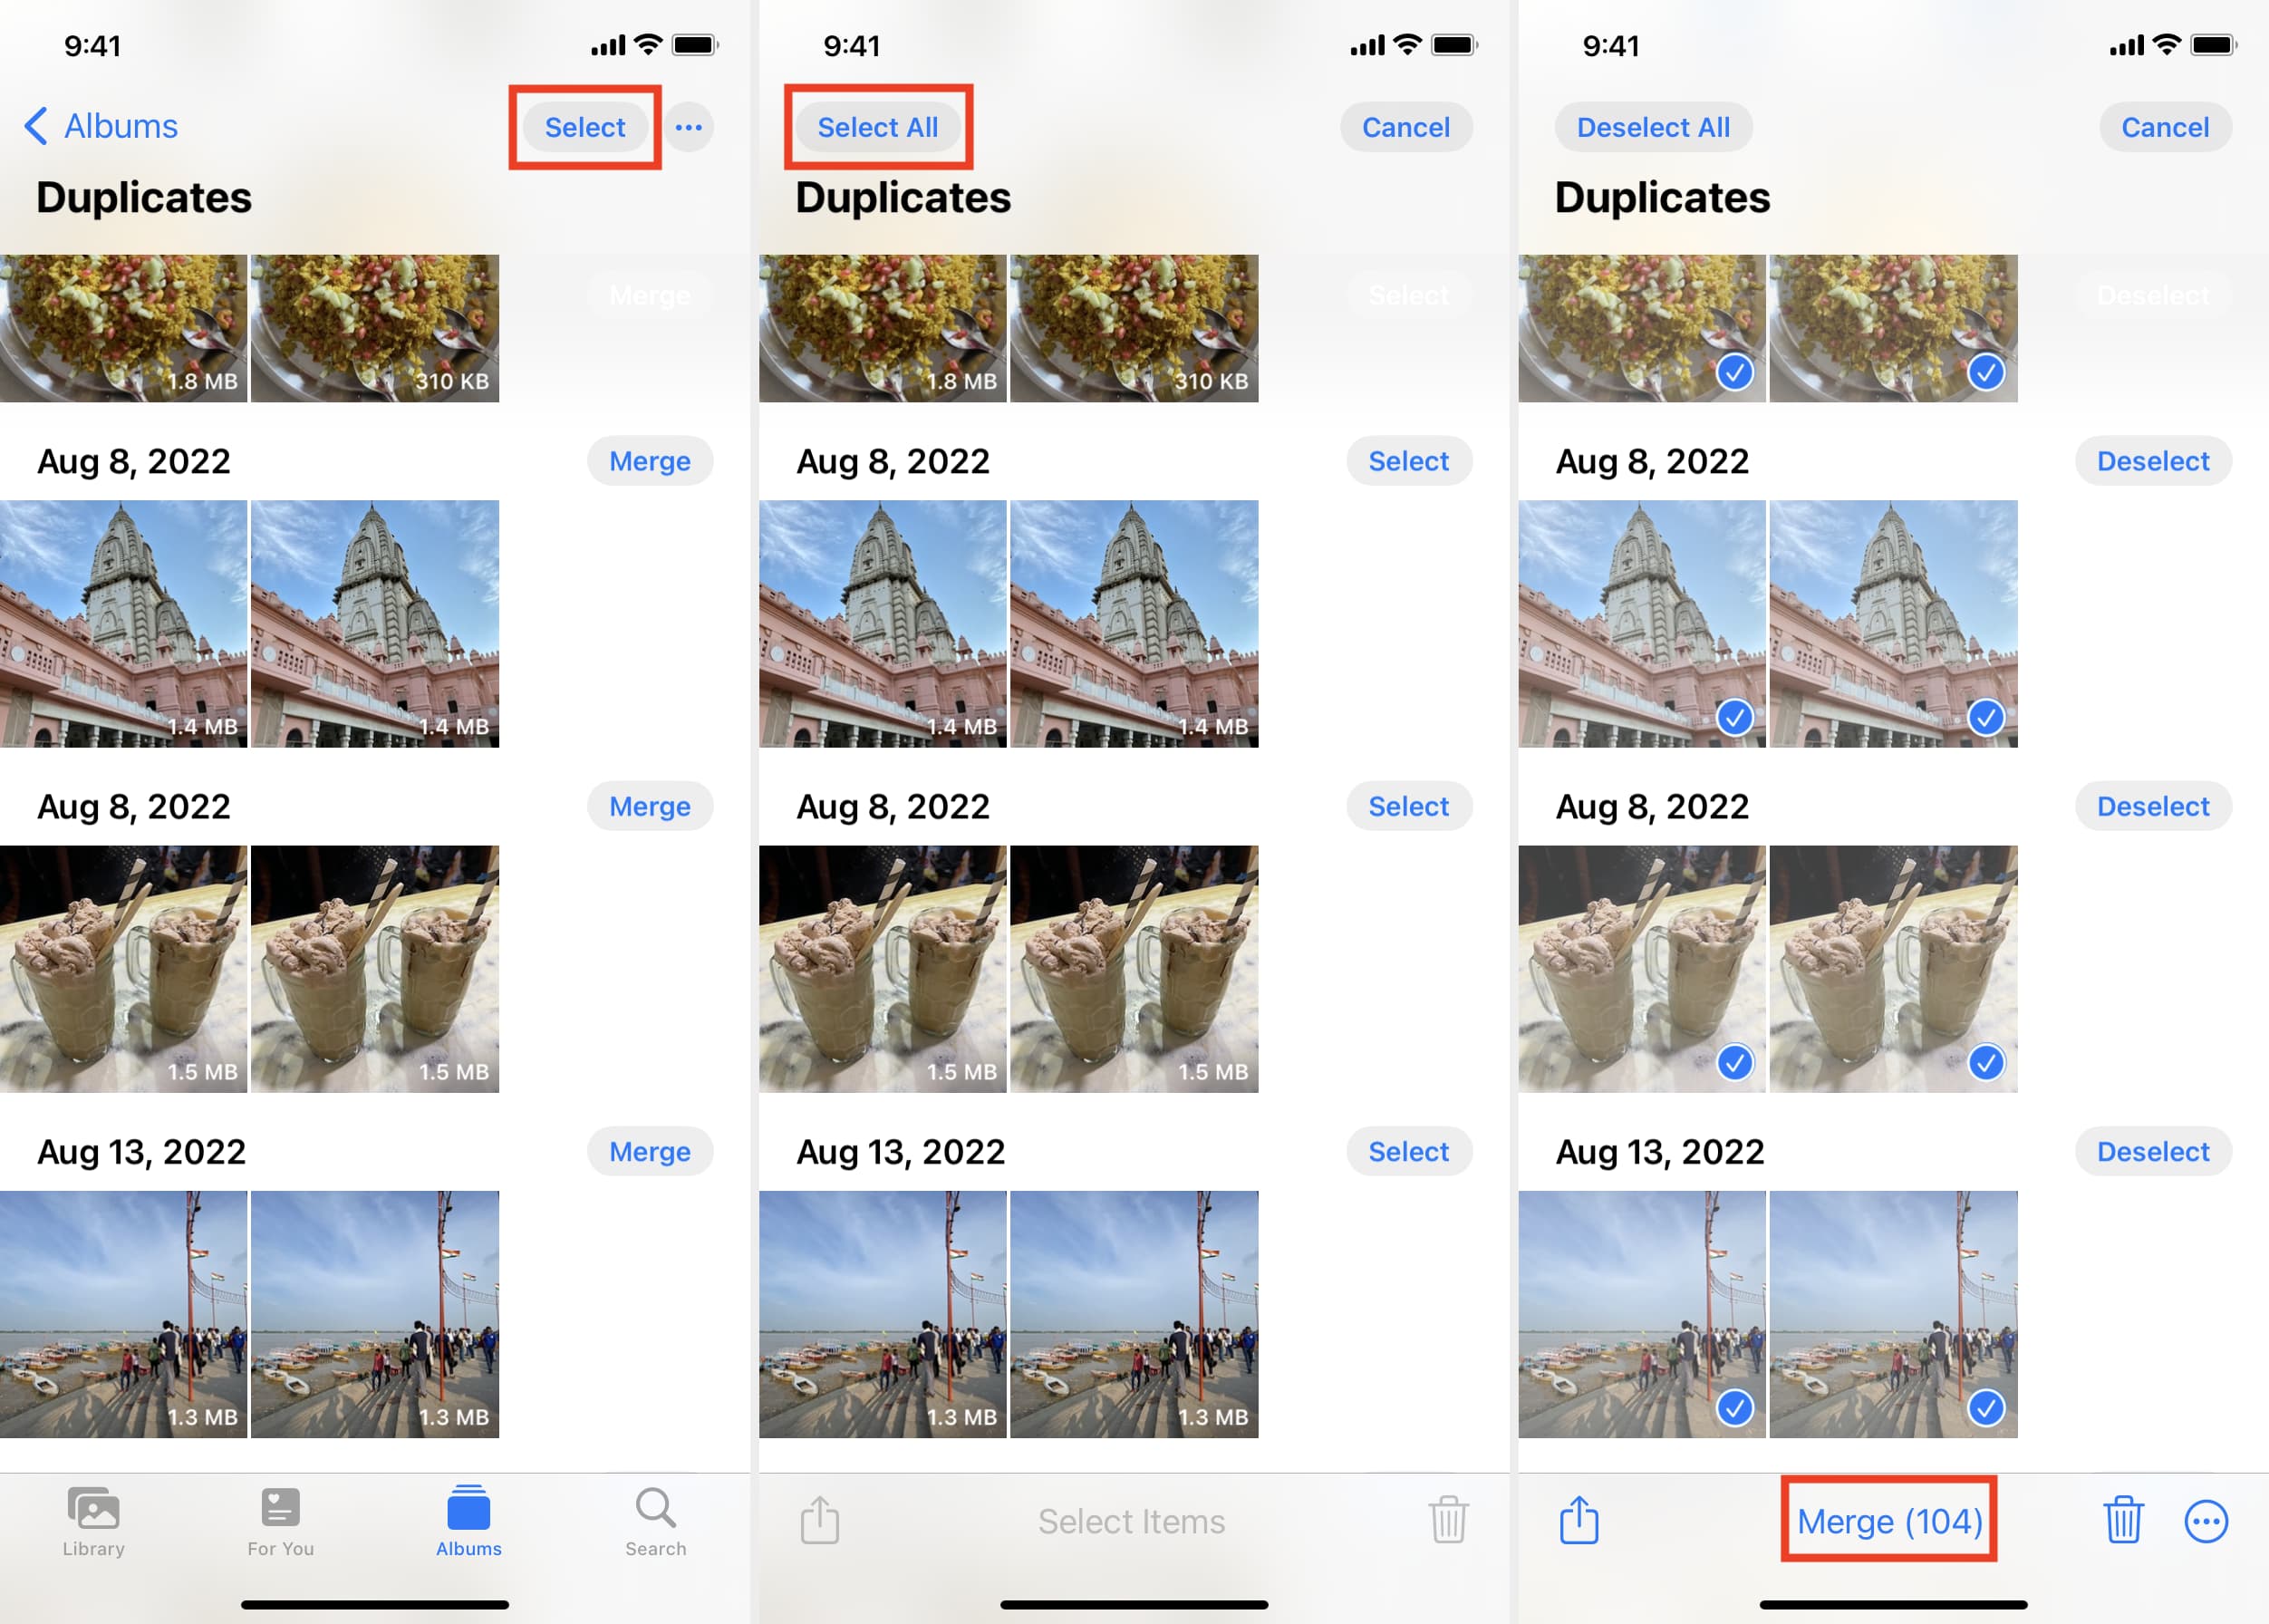 Select and merge all duplicate photos on iPhone in iOS 16